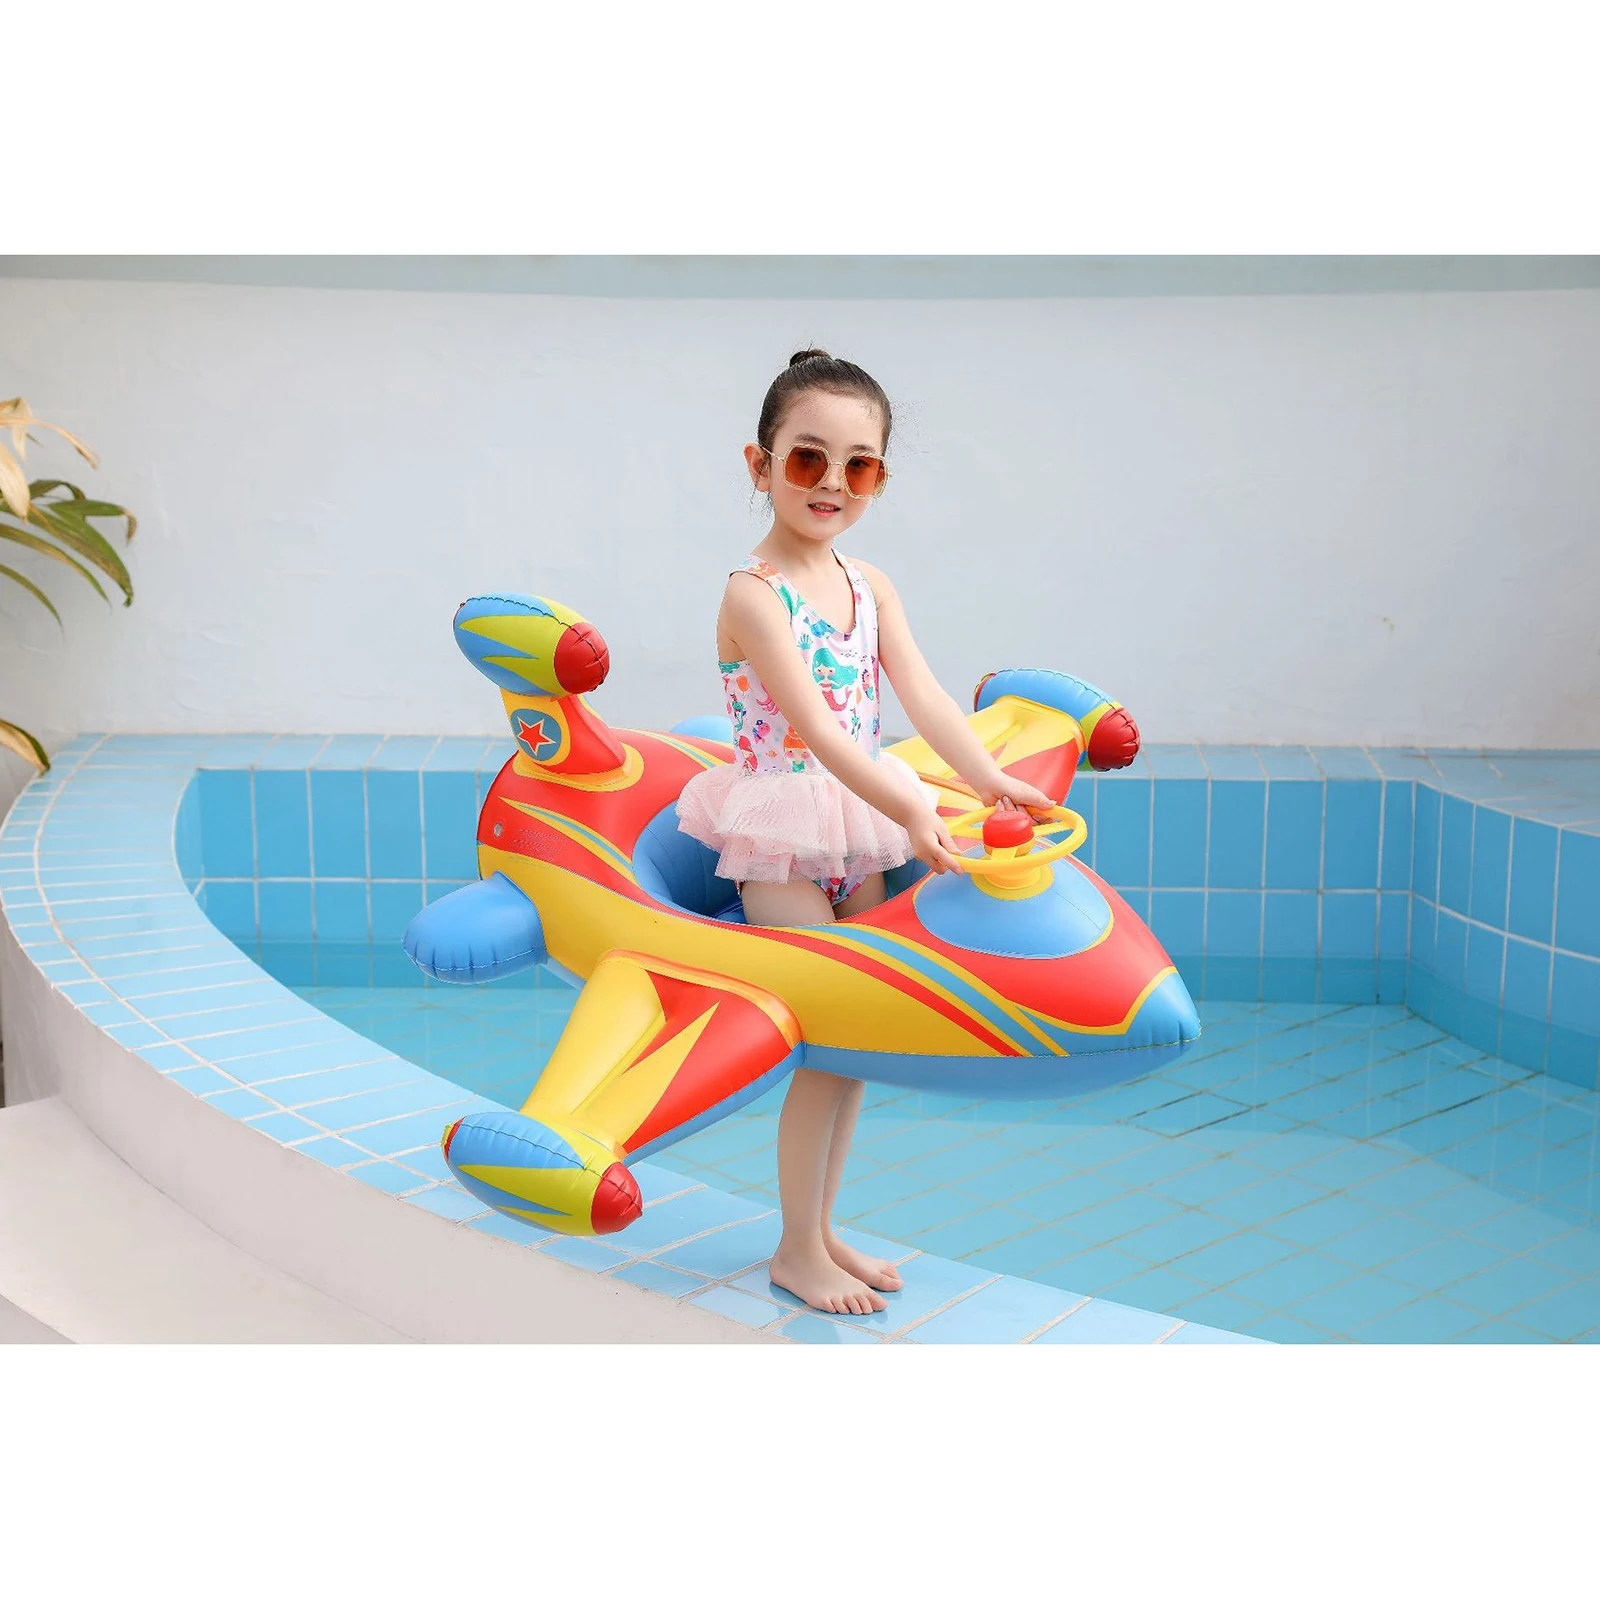 PVC Swimming Baby Inflatable Airplane Swimming Float Seat Boat Pool Outdoor Beach Toys for Kids